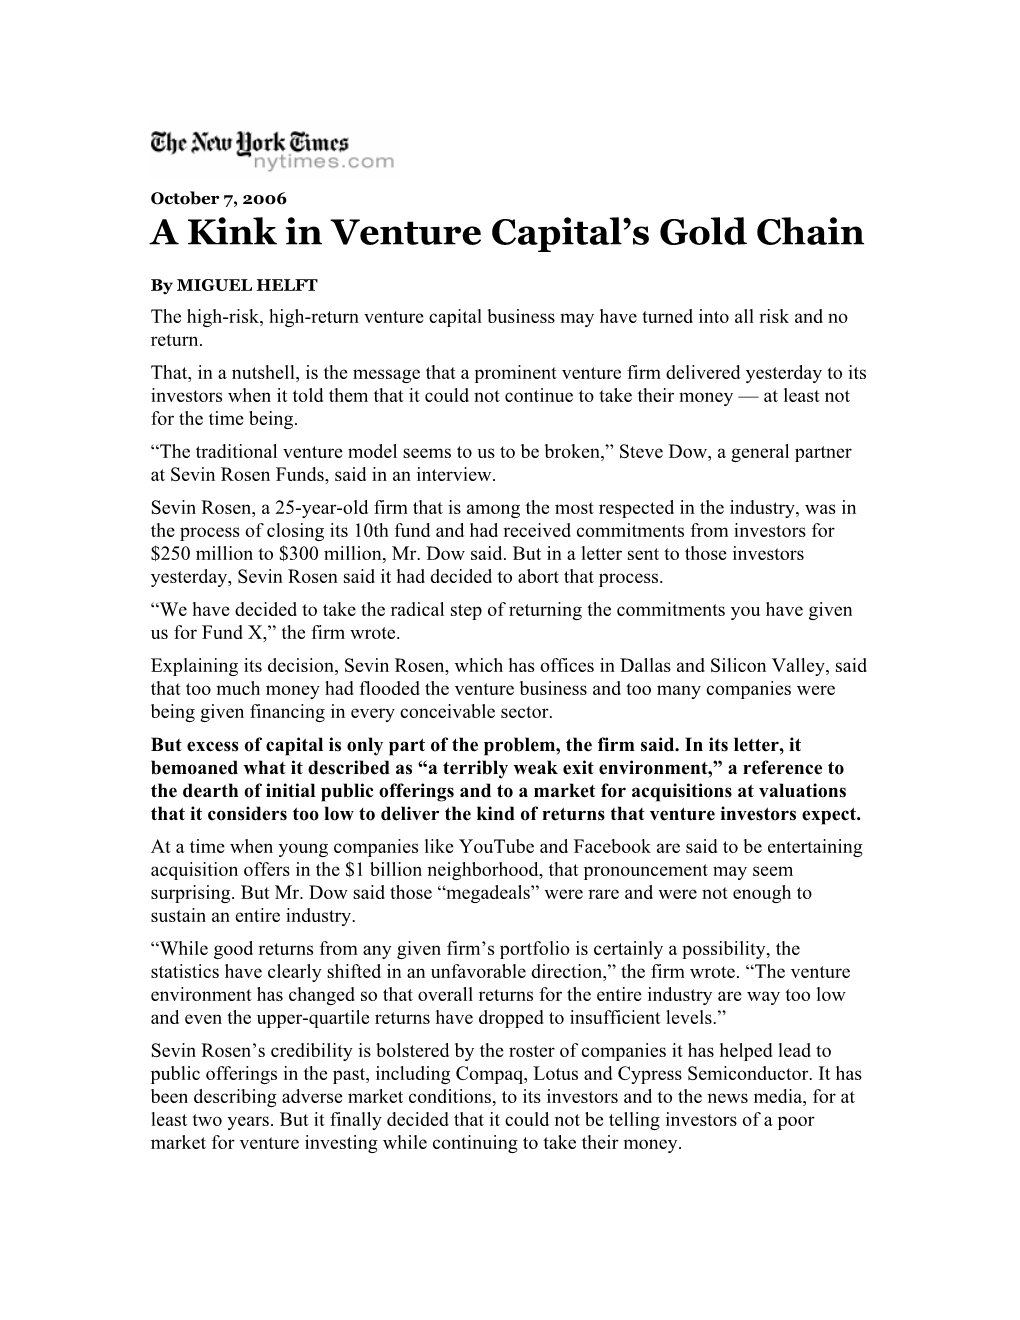 A Kink in Venture Capital's Gold Chain